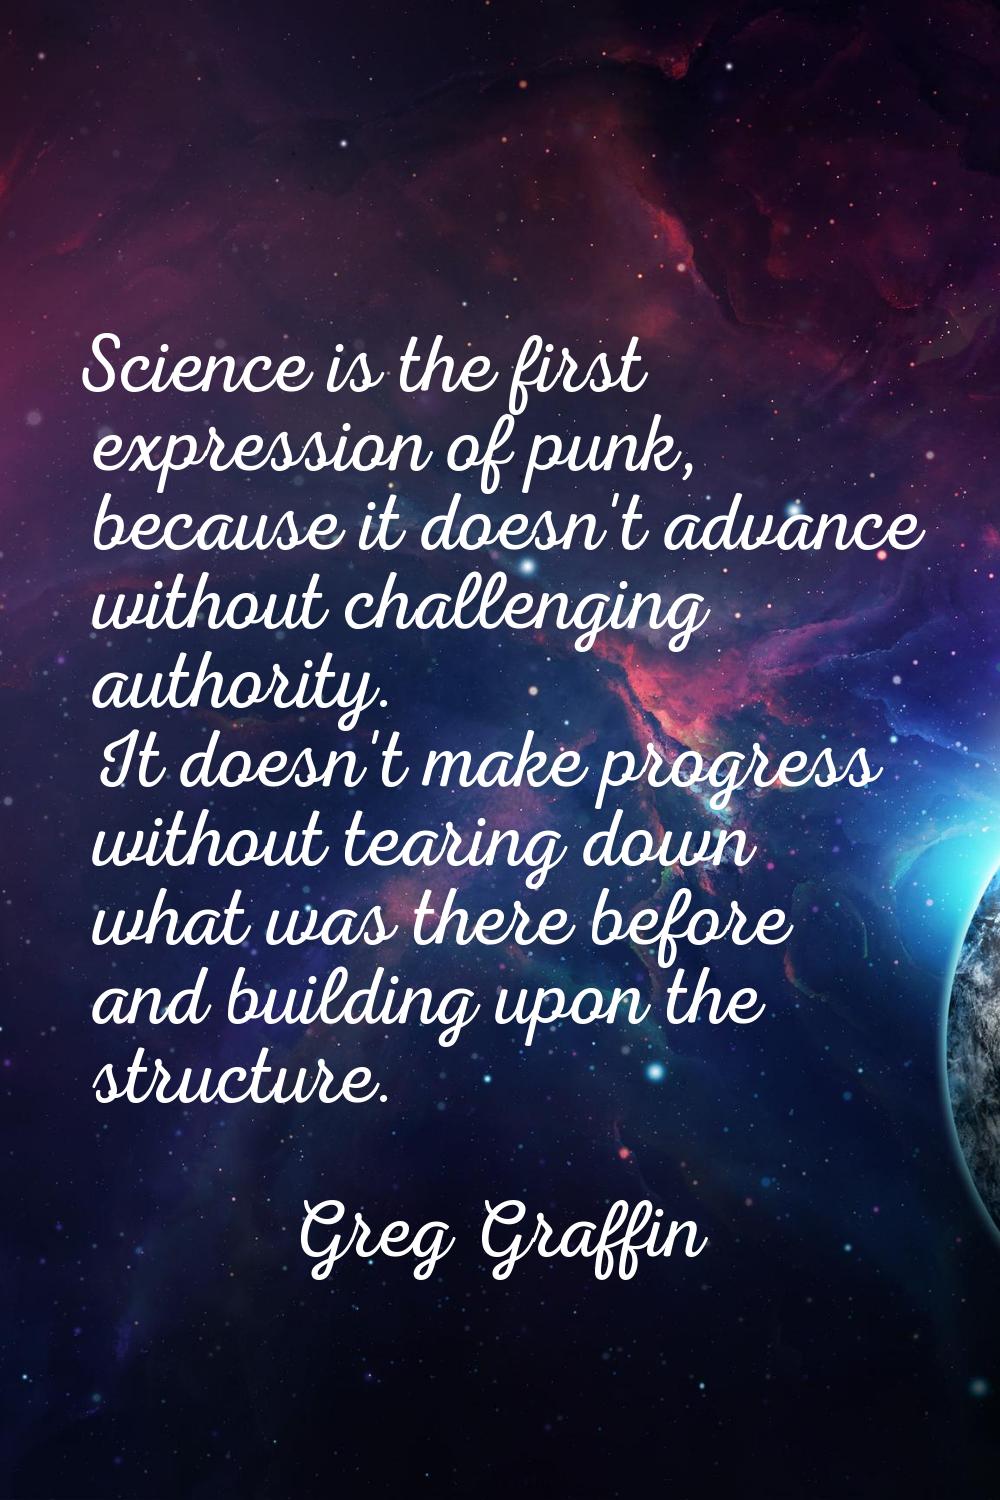 Science is the first expression of punk, because it doesn't advance without challenging authority. 